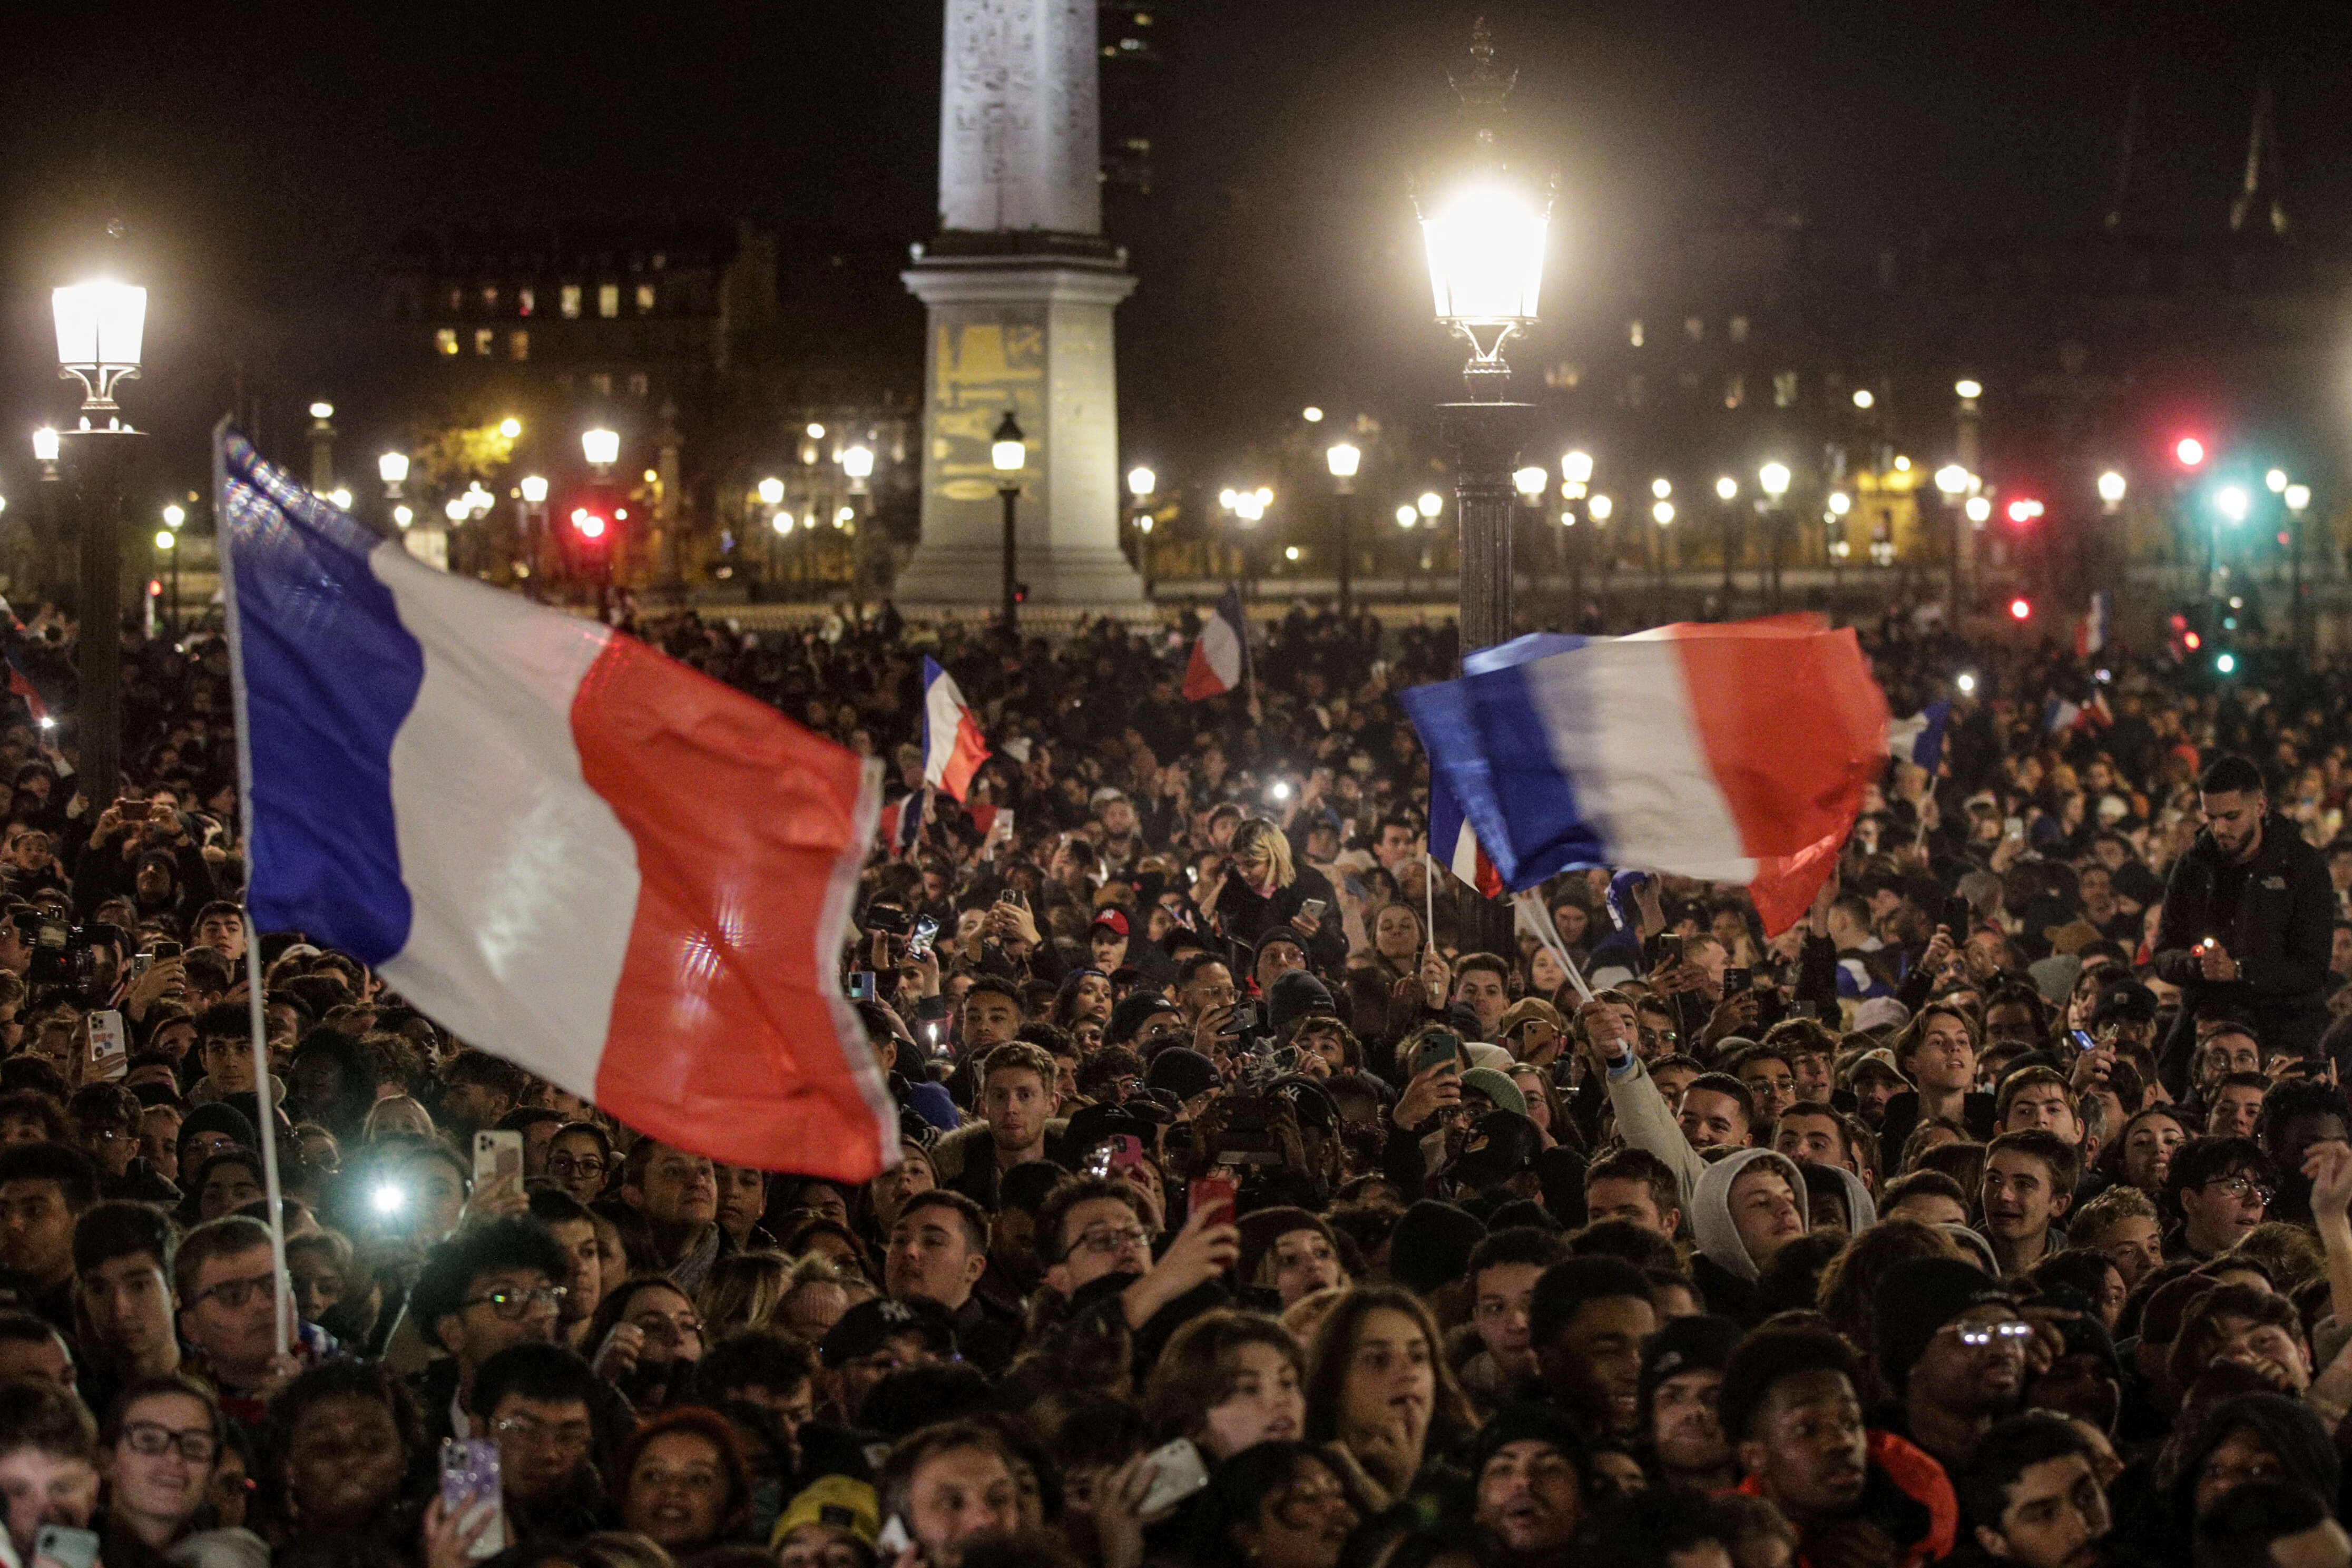 Fans wave French flags as they wait at the Place de la Concorde for the arrival of the French national football team at the Hotel de Crillon, a day after the Qatar 2022 World Cup final match against Argentina, in central Paris on December 19, 2022. (Photo by GEOFFROY VAN DER HASSELT / AFP)